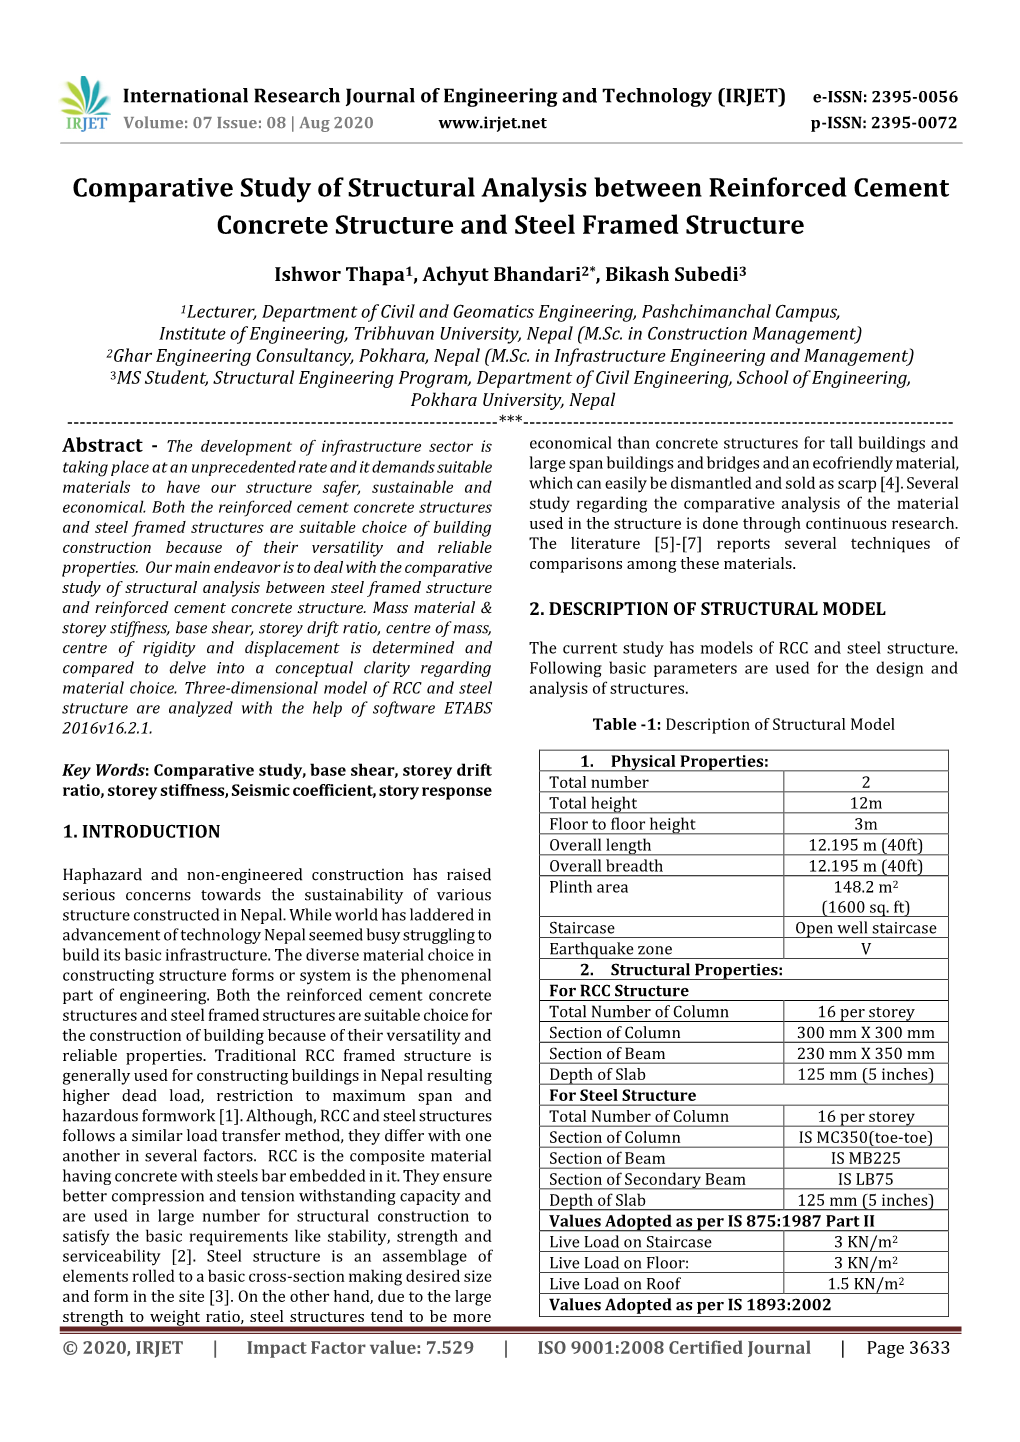 Comparative Study of Structural Analysis Between Reinforced Cement Concrete Structure and Steel Framed Structure